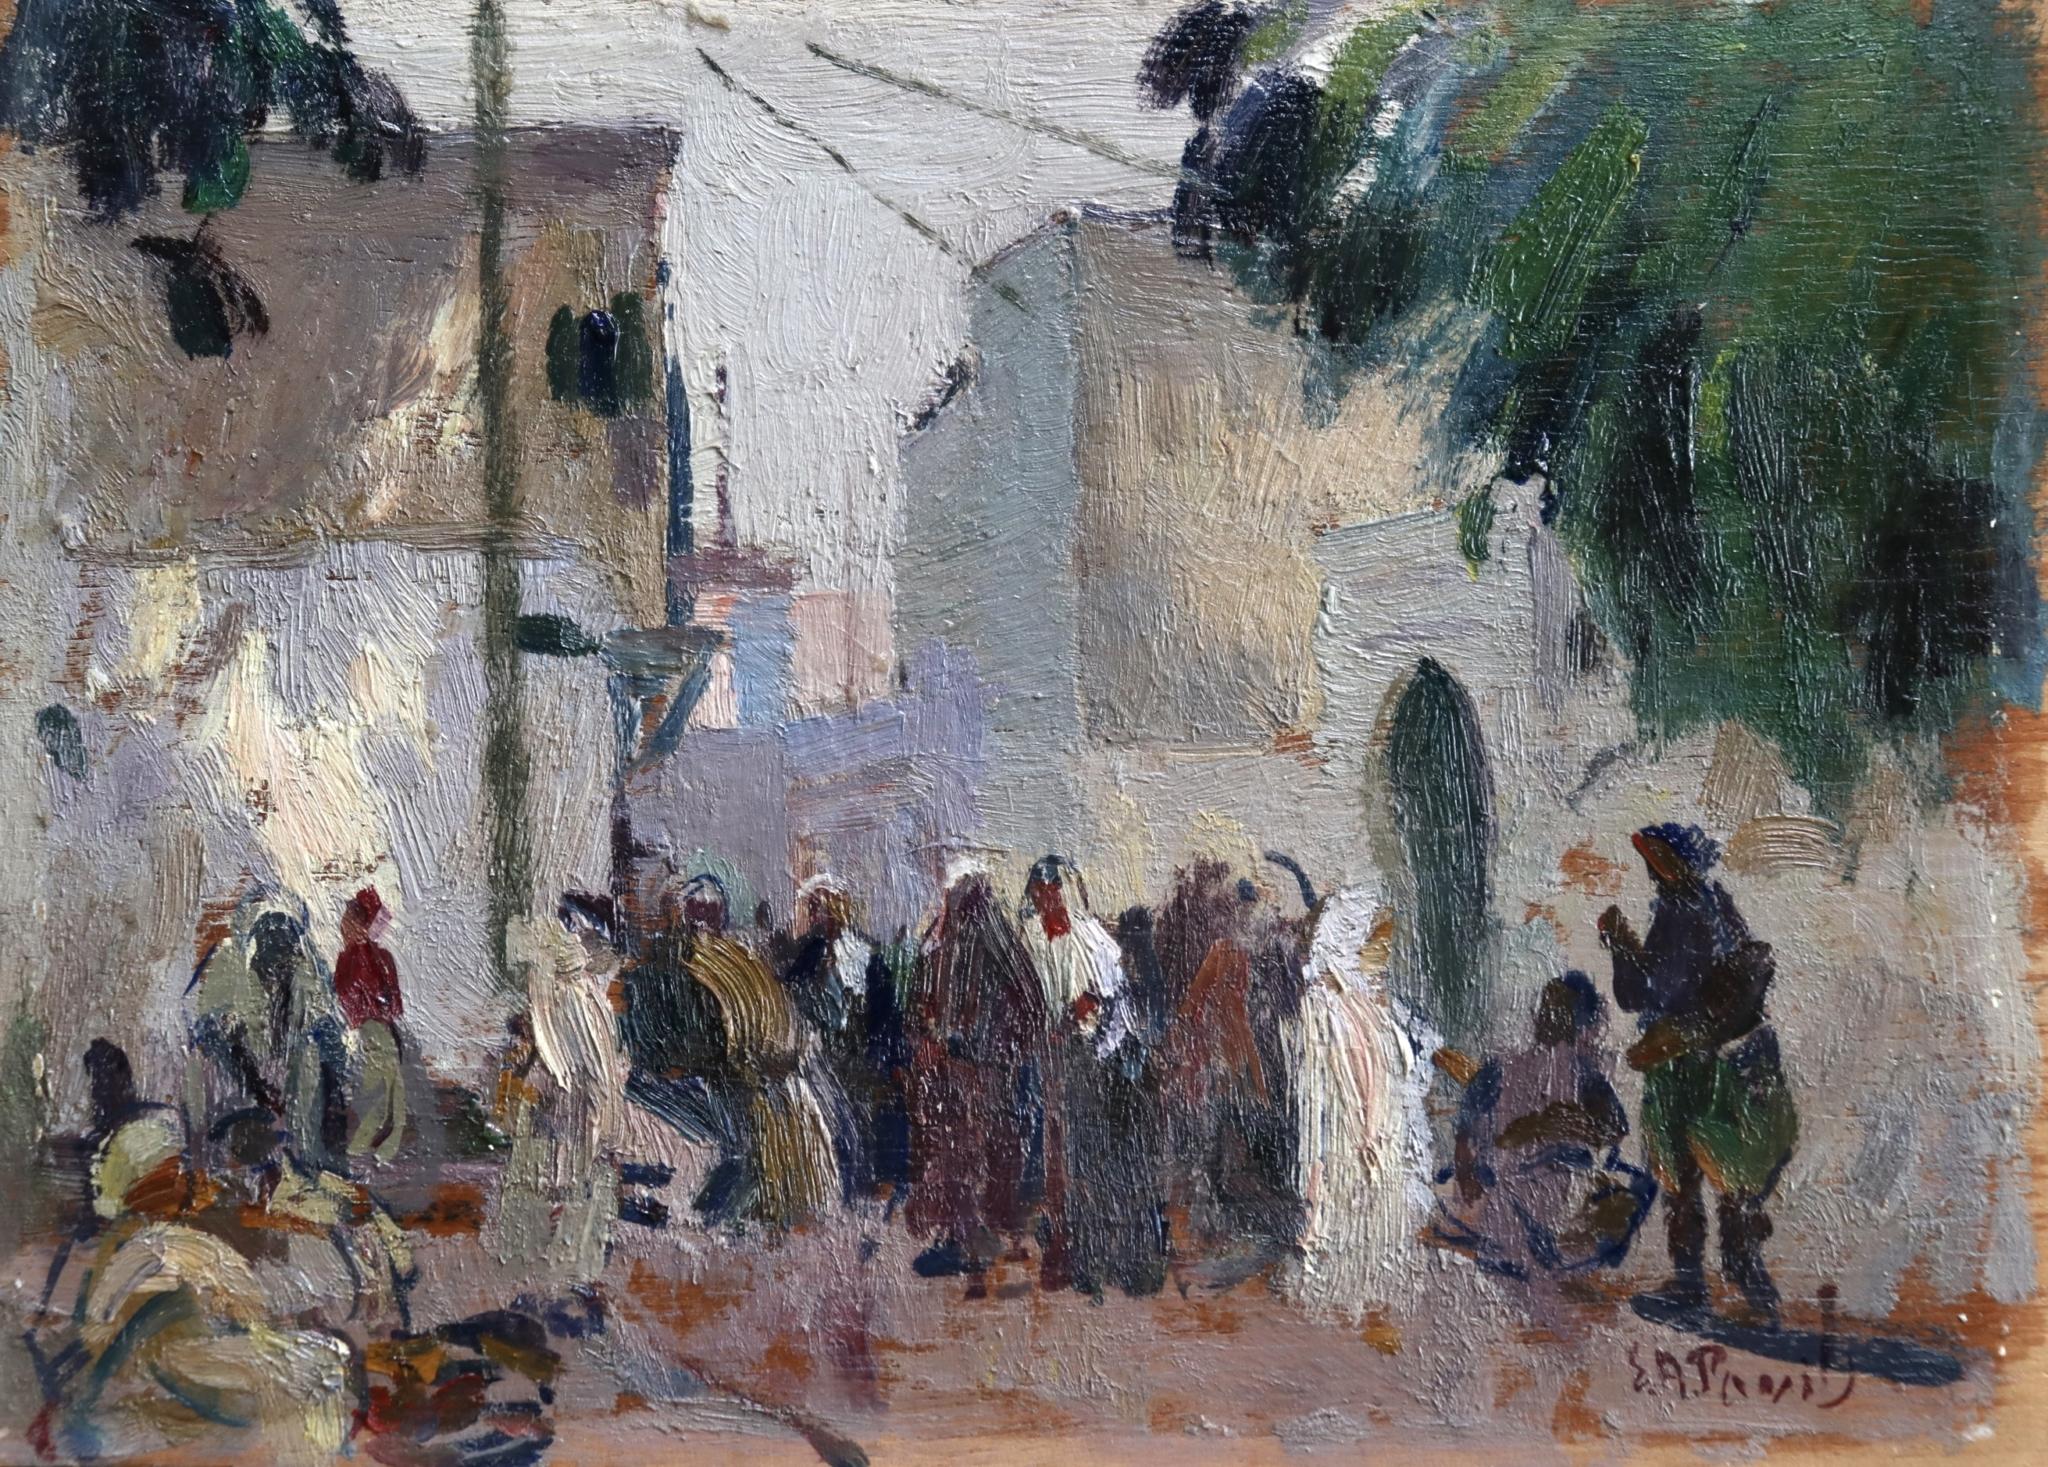 A beautifully detailed and coloured oil on panel by Russian Impressionist painter Elie Anatole Pavil depicting Arabs in a market. Signed lower right. This painting is not currently framed but a suitable frame can be sourced if required.

Elie Pavil